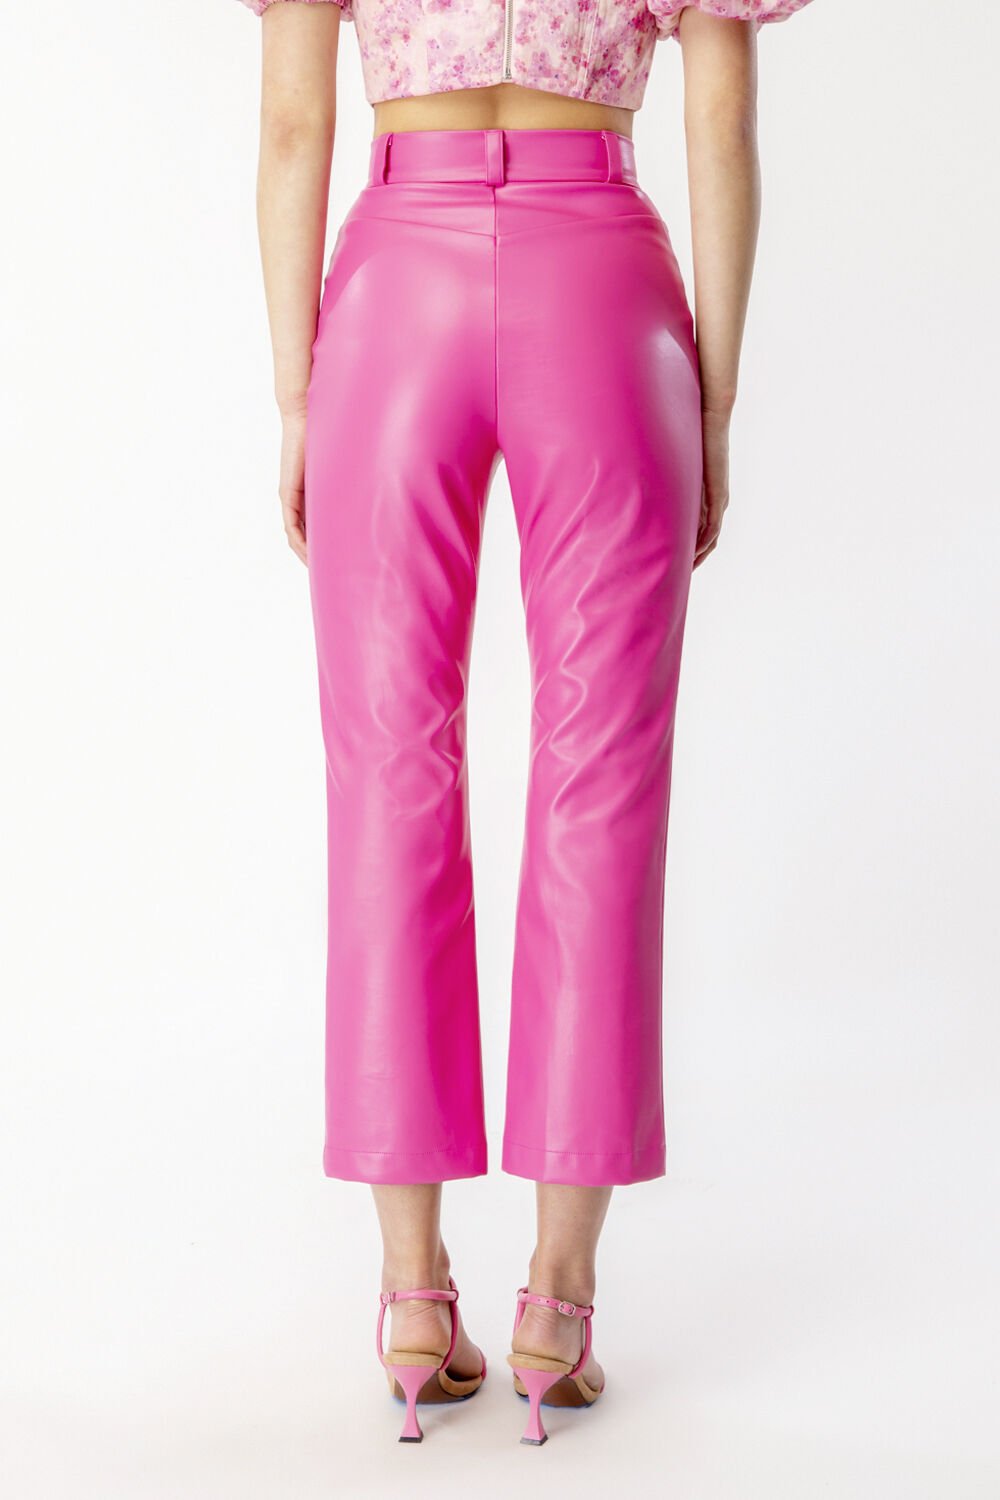 4th  Reckless  Tropez Leather Trouser in Lilac  Showpo USA